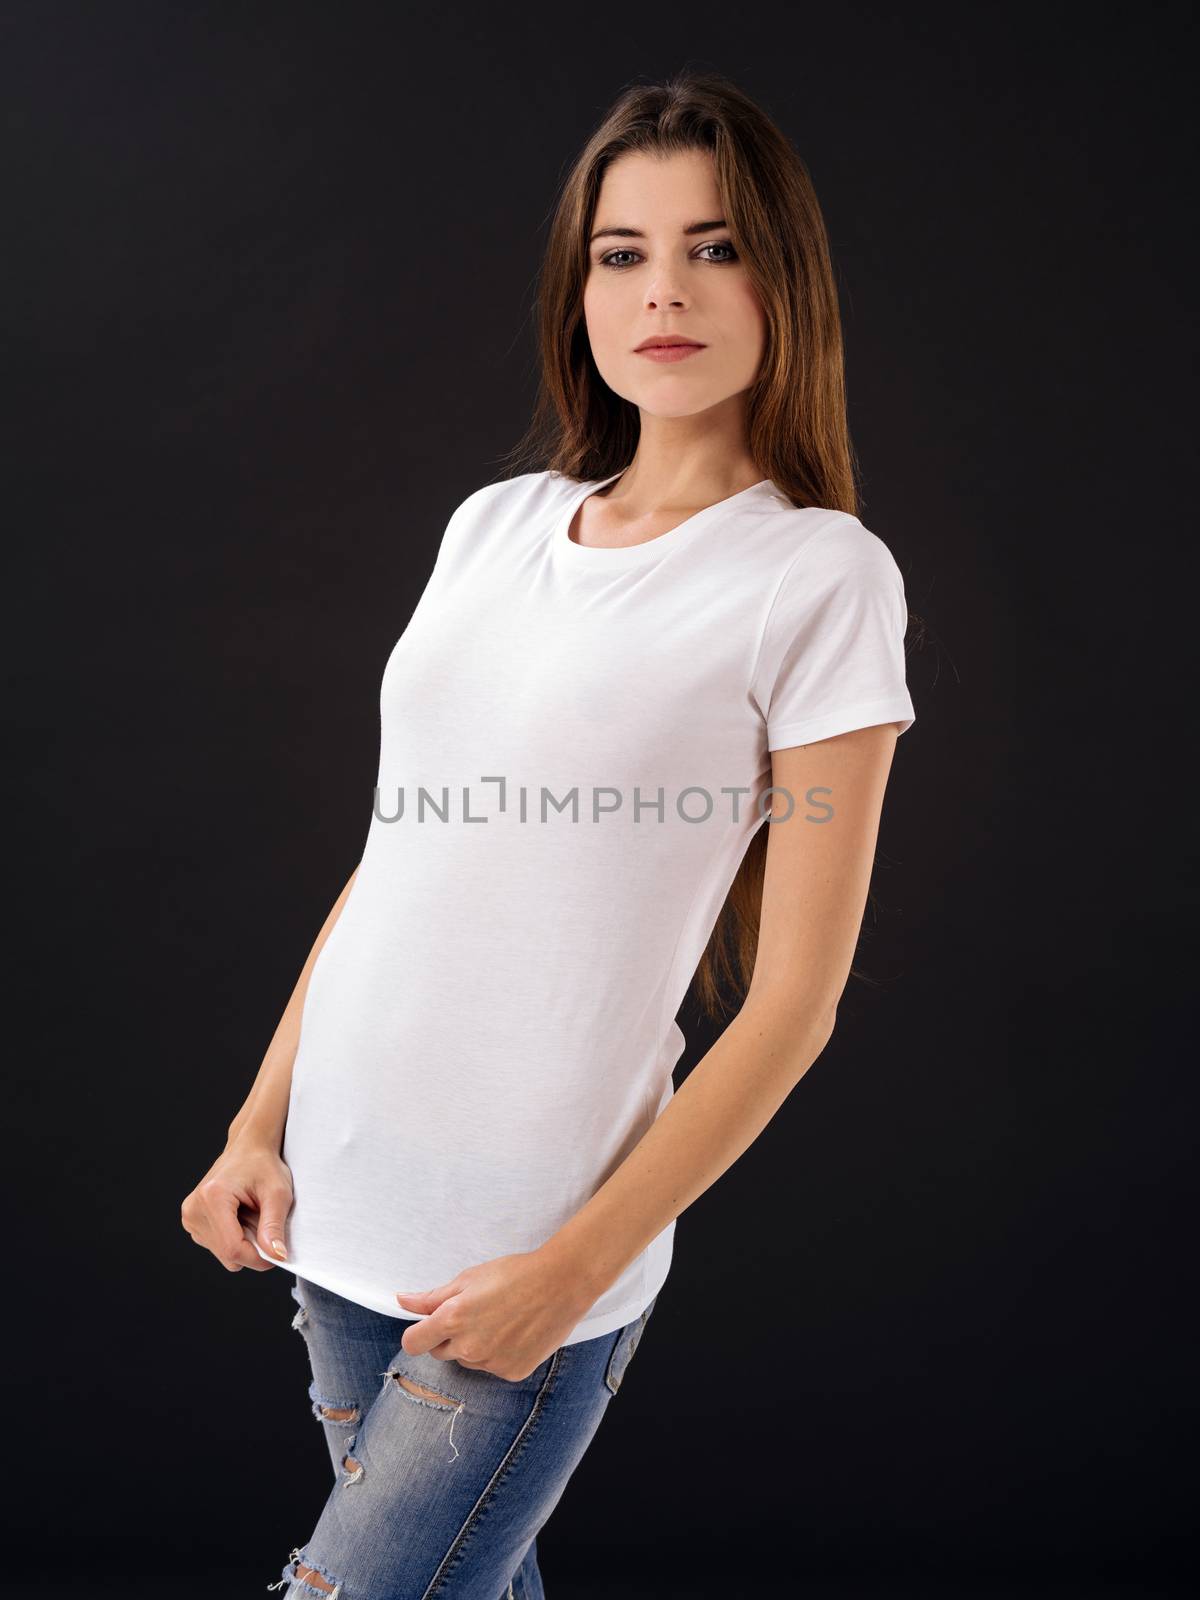 Woman with blank white shirt over black background by sumners